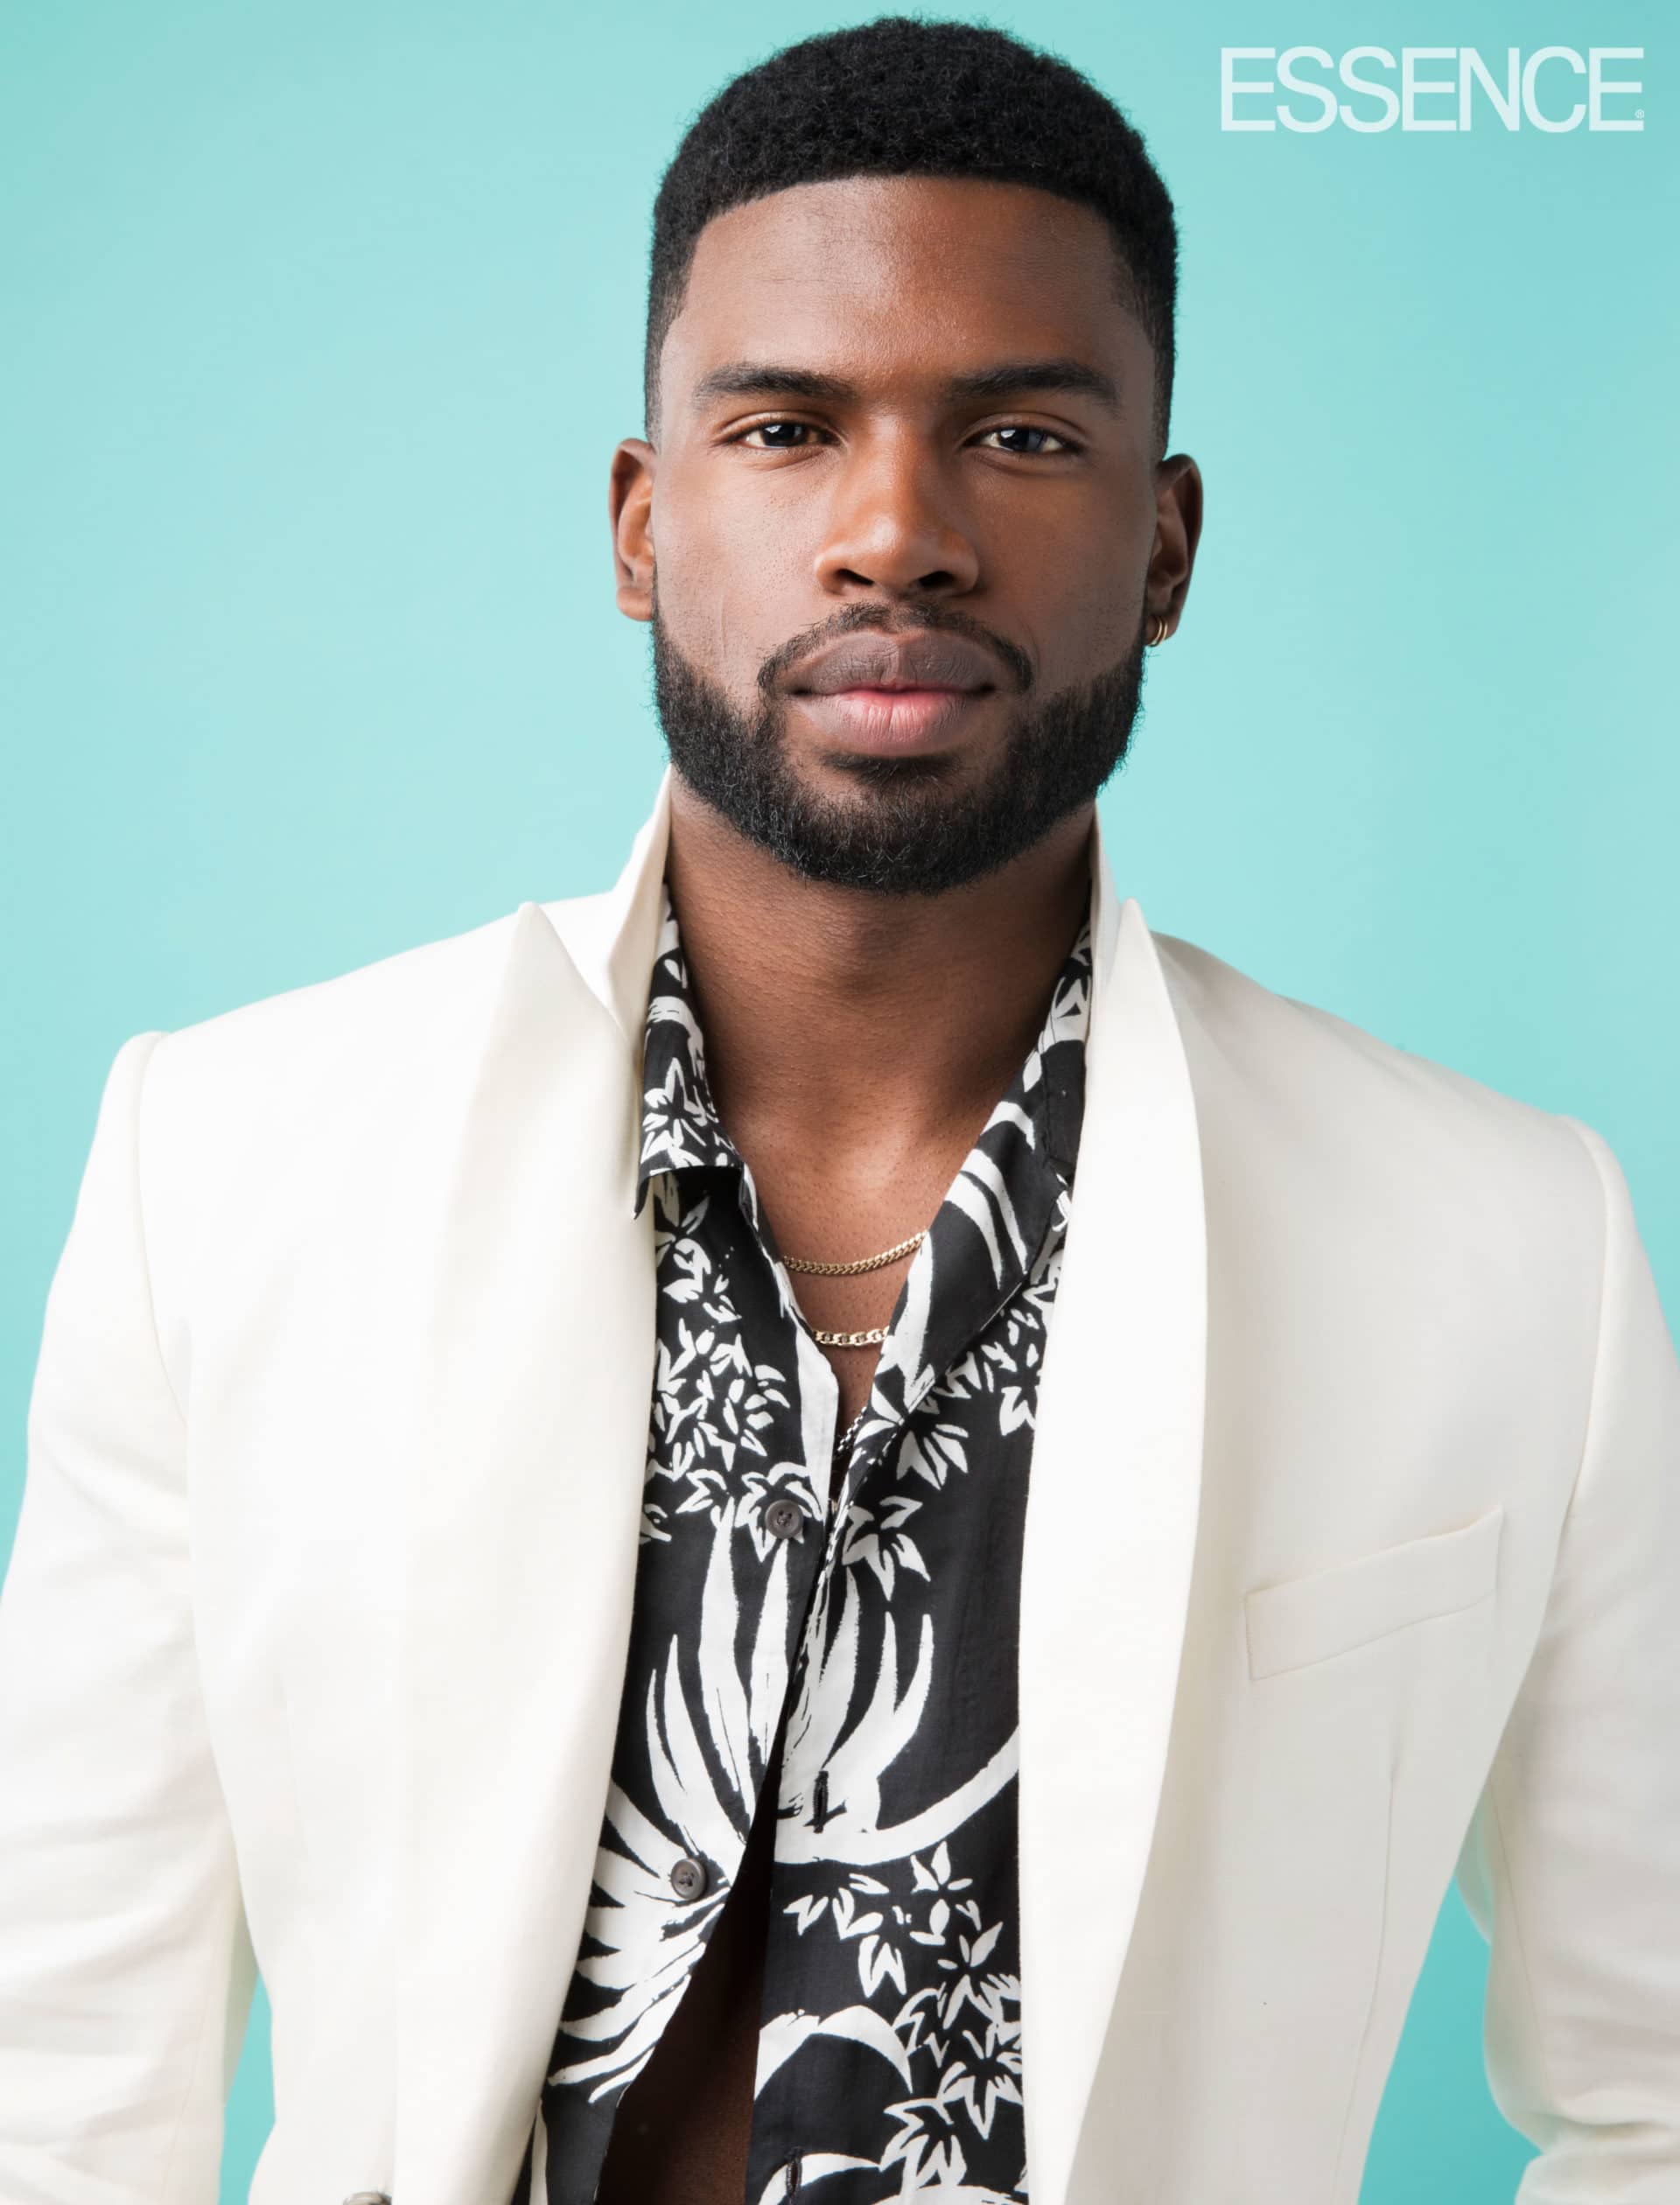 ESSENCE Exclusive: All The Hot Guys We Styled For Our Men’s Pages In 2018